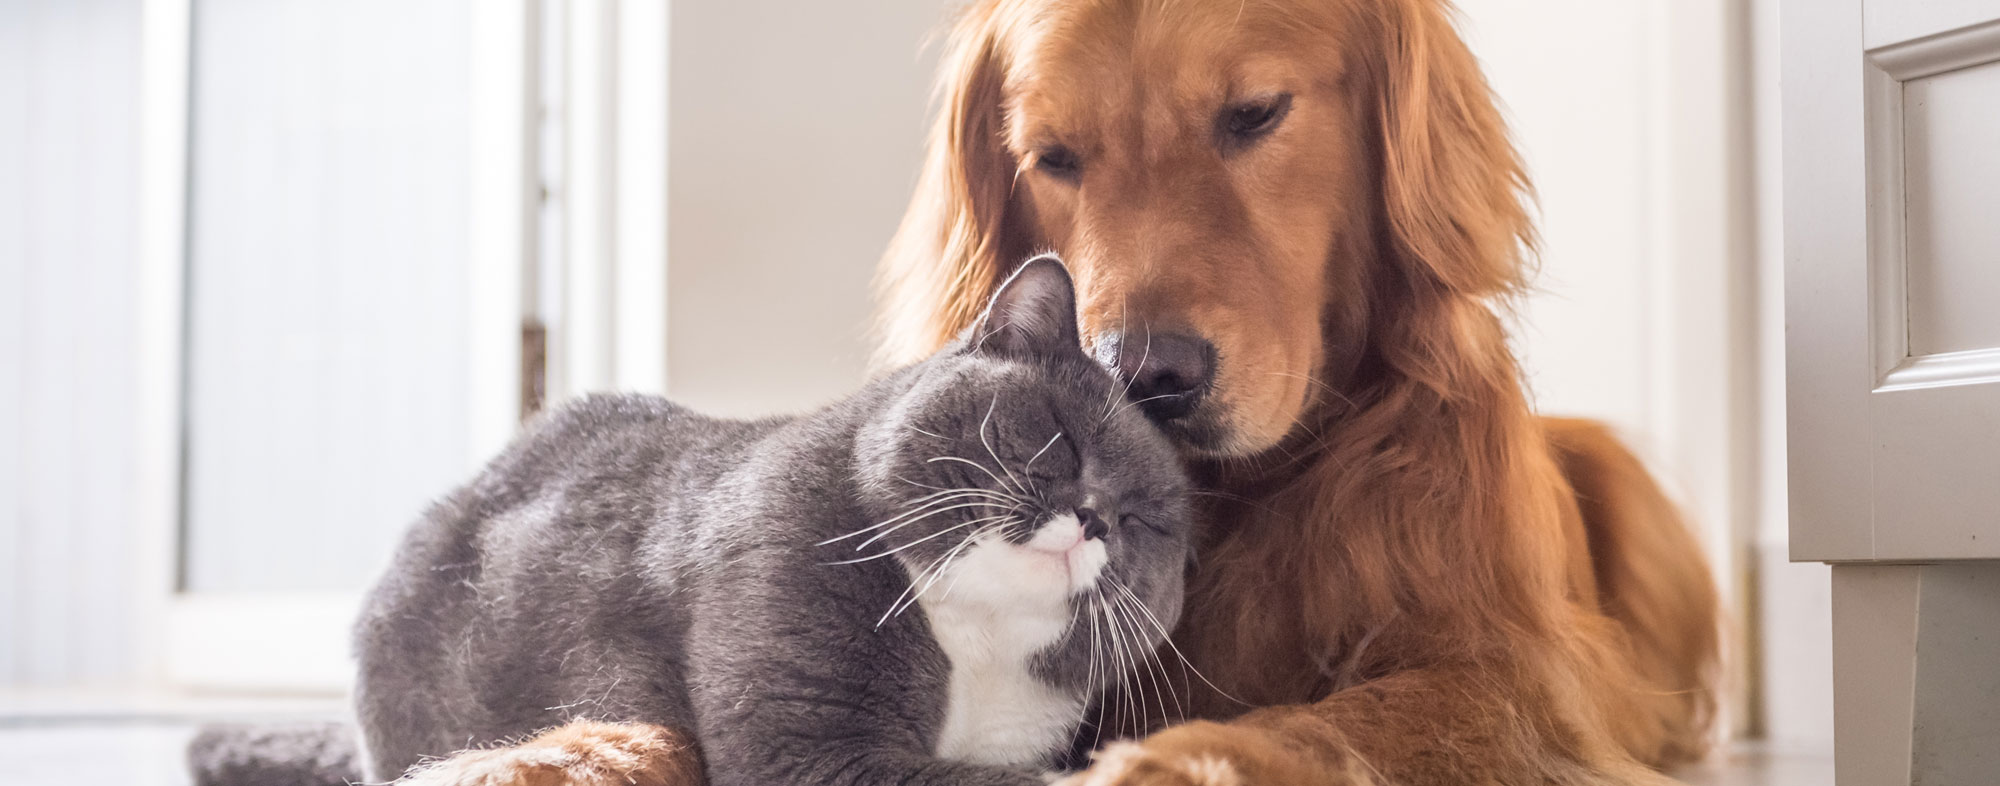 In any home, the cat and the dog can live together peacefully